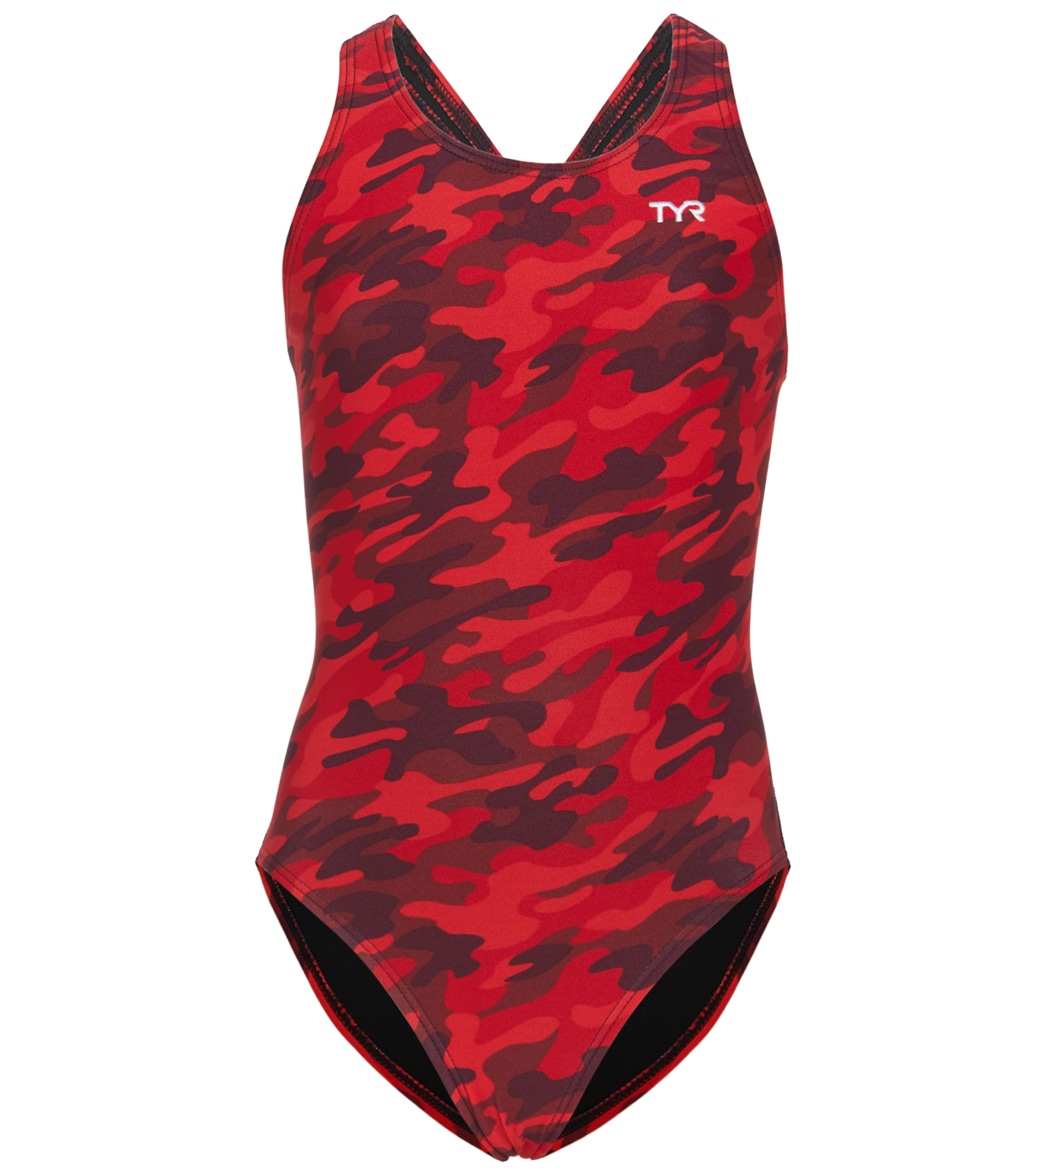 TYR Girls' Camo Maxfit One Piece Swimsuit - Red 24 - Swimoutlet.com